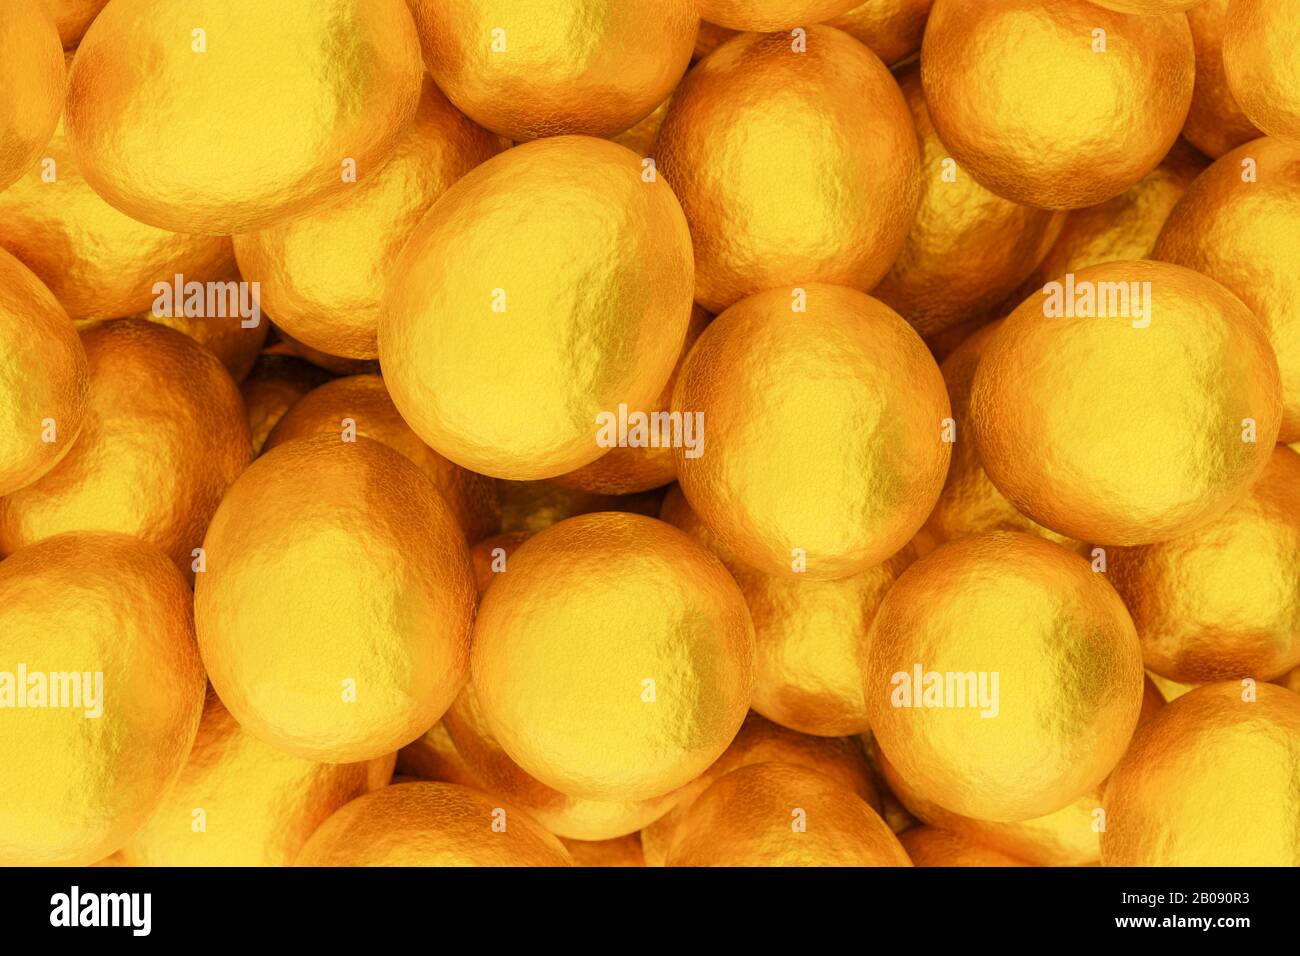 3D rendering - Happy easter card: A pile of chocolate eggs packed in golden foil shot from above. Full frame. Stock Photo